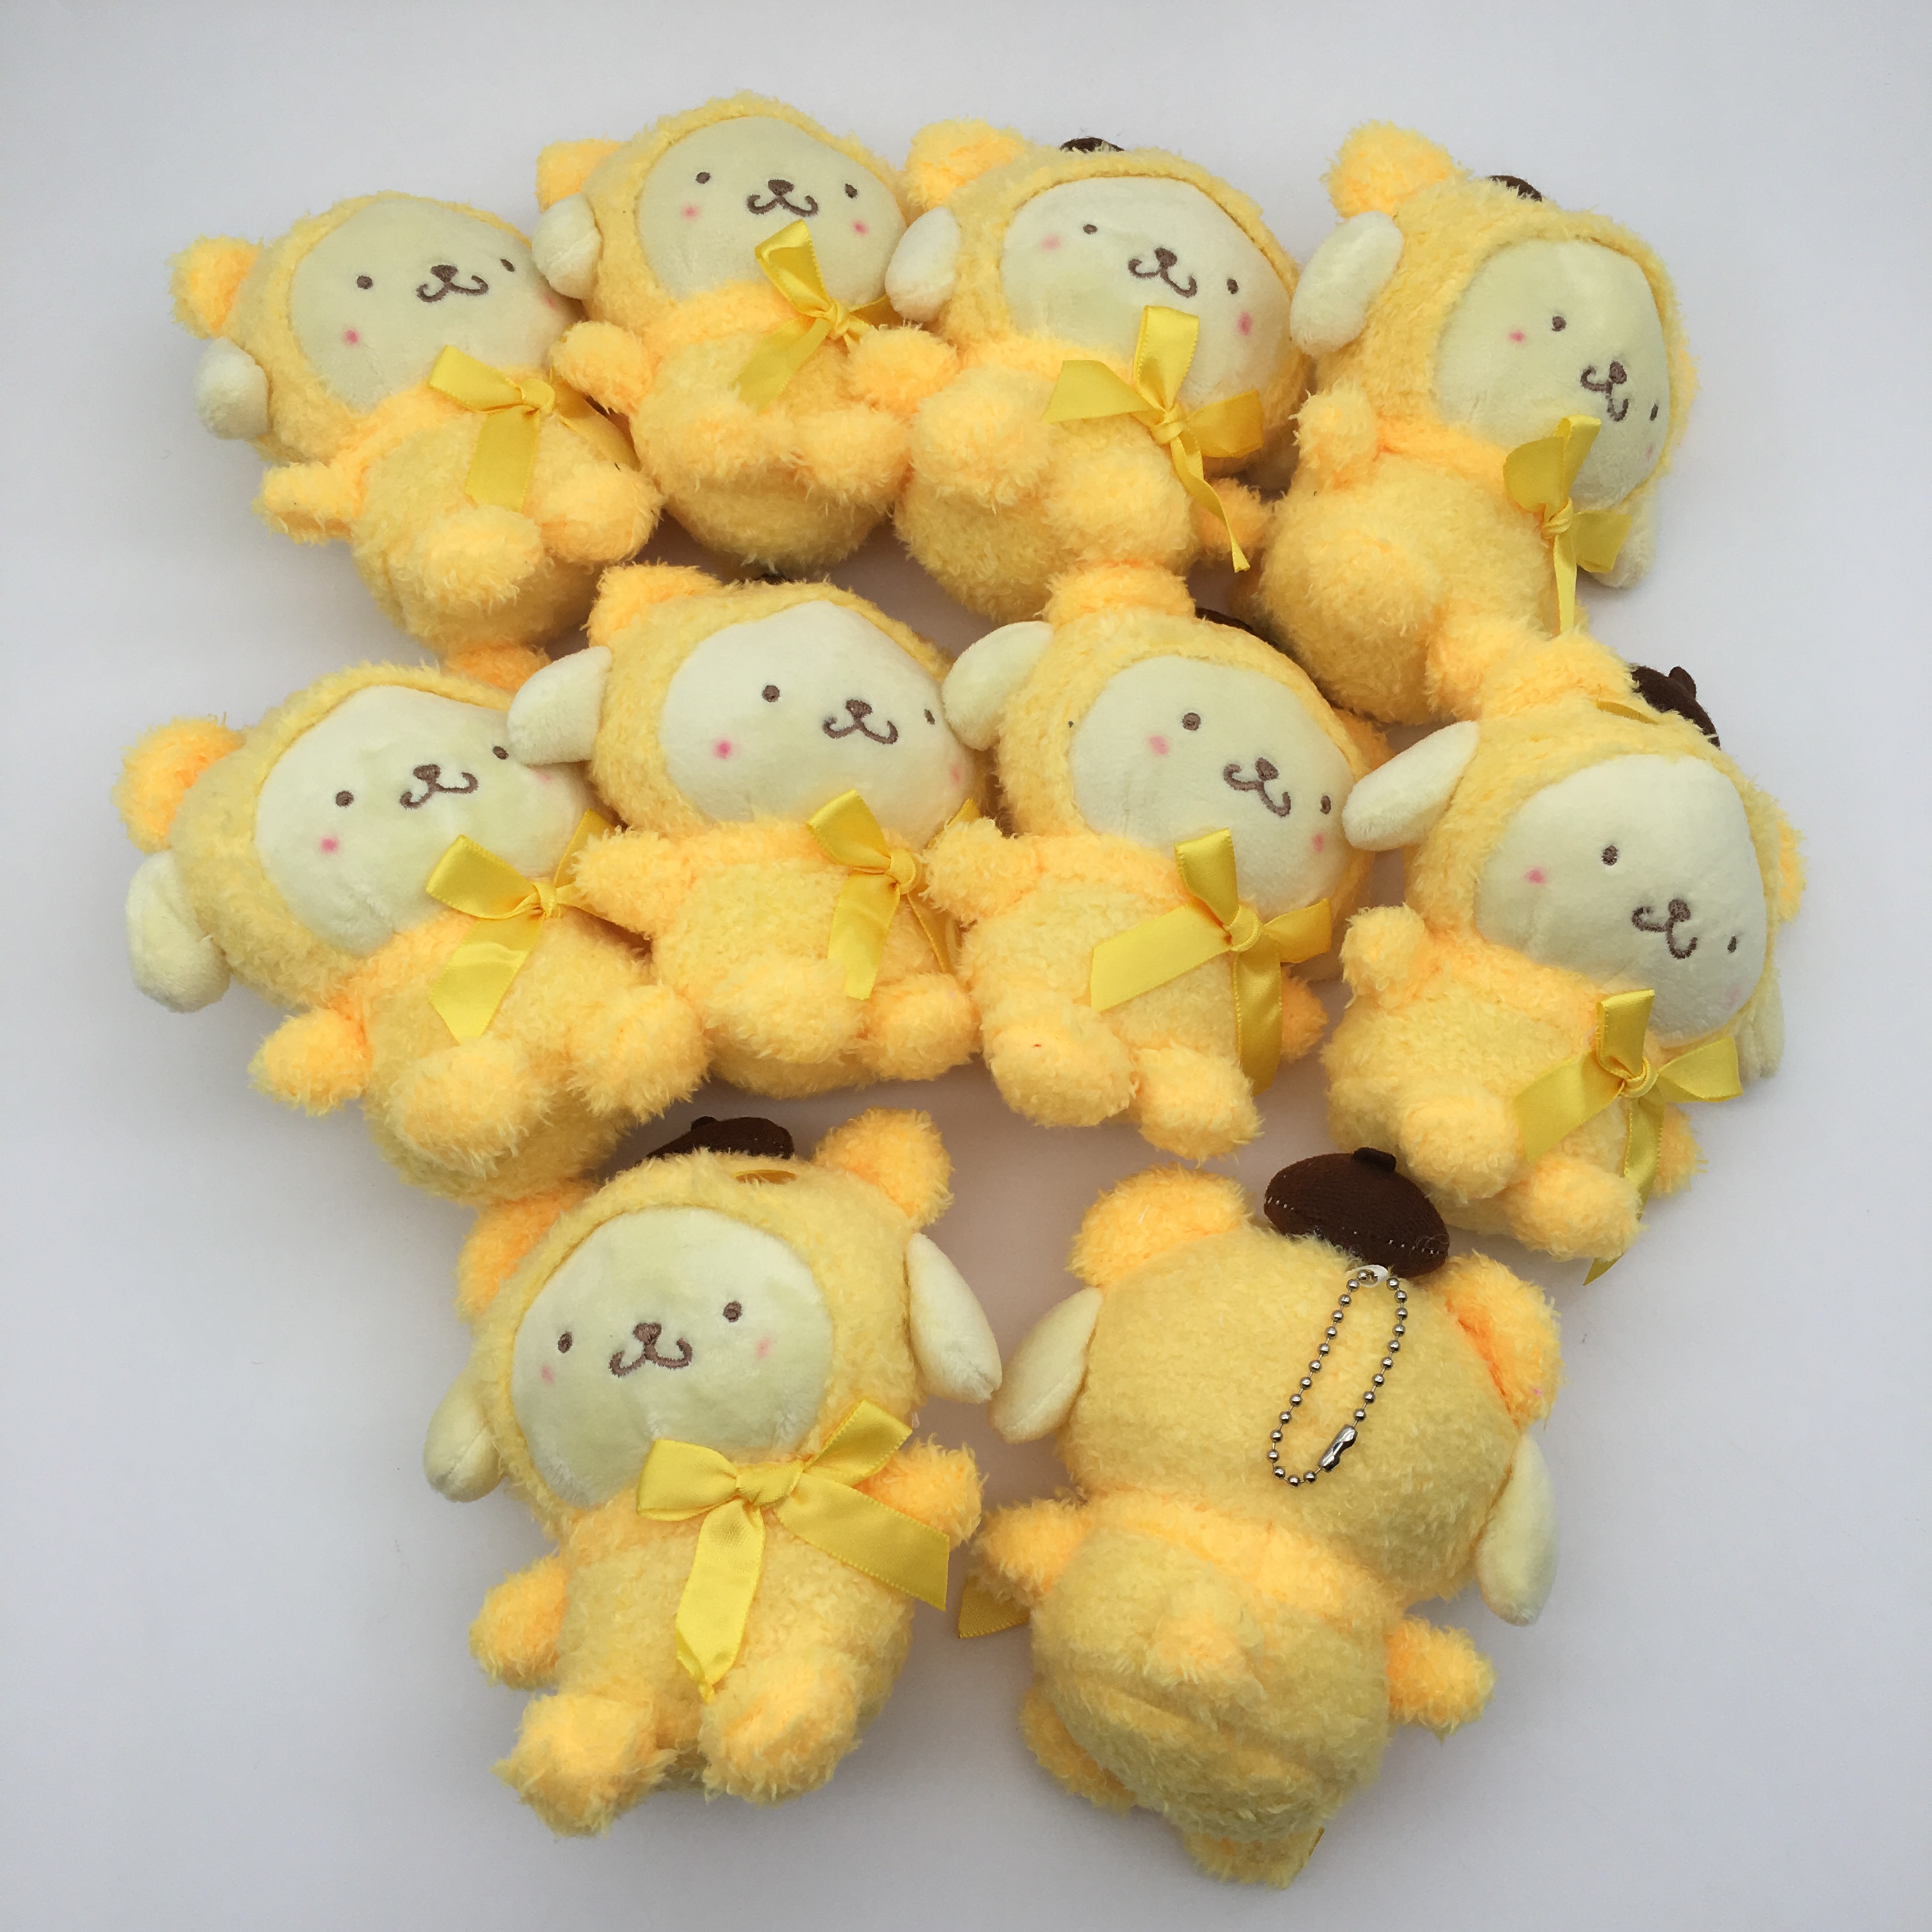 Pudding dog anime keychain，price for a set ofr 10 pcs,15cm